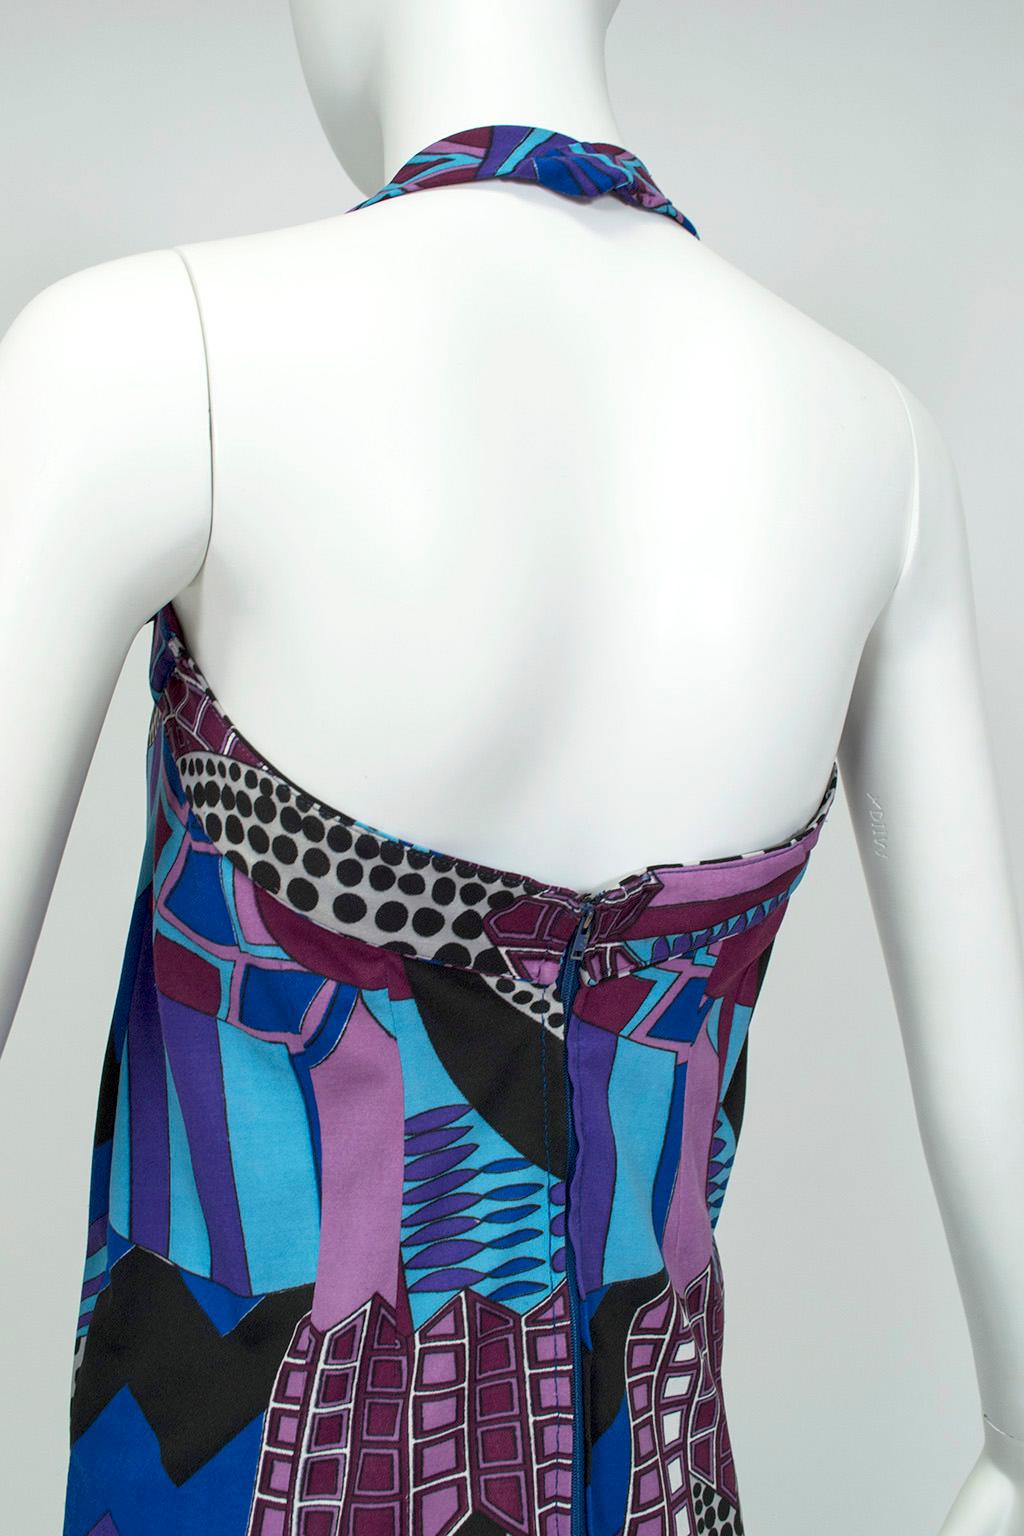 Signed Colin Glascoe Blue Abstract Stained Glass Midi Halter Dress - M, 1970s For Sale 2